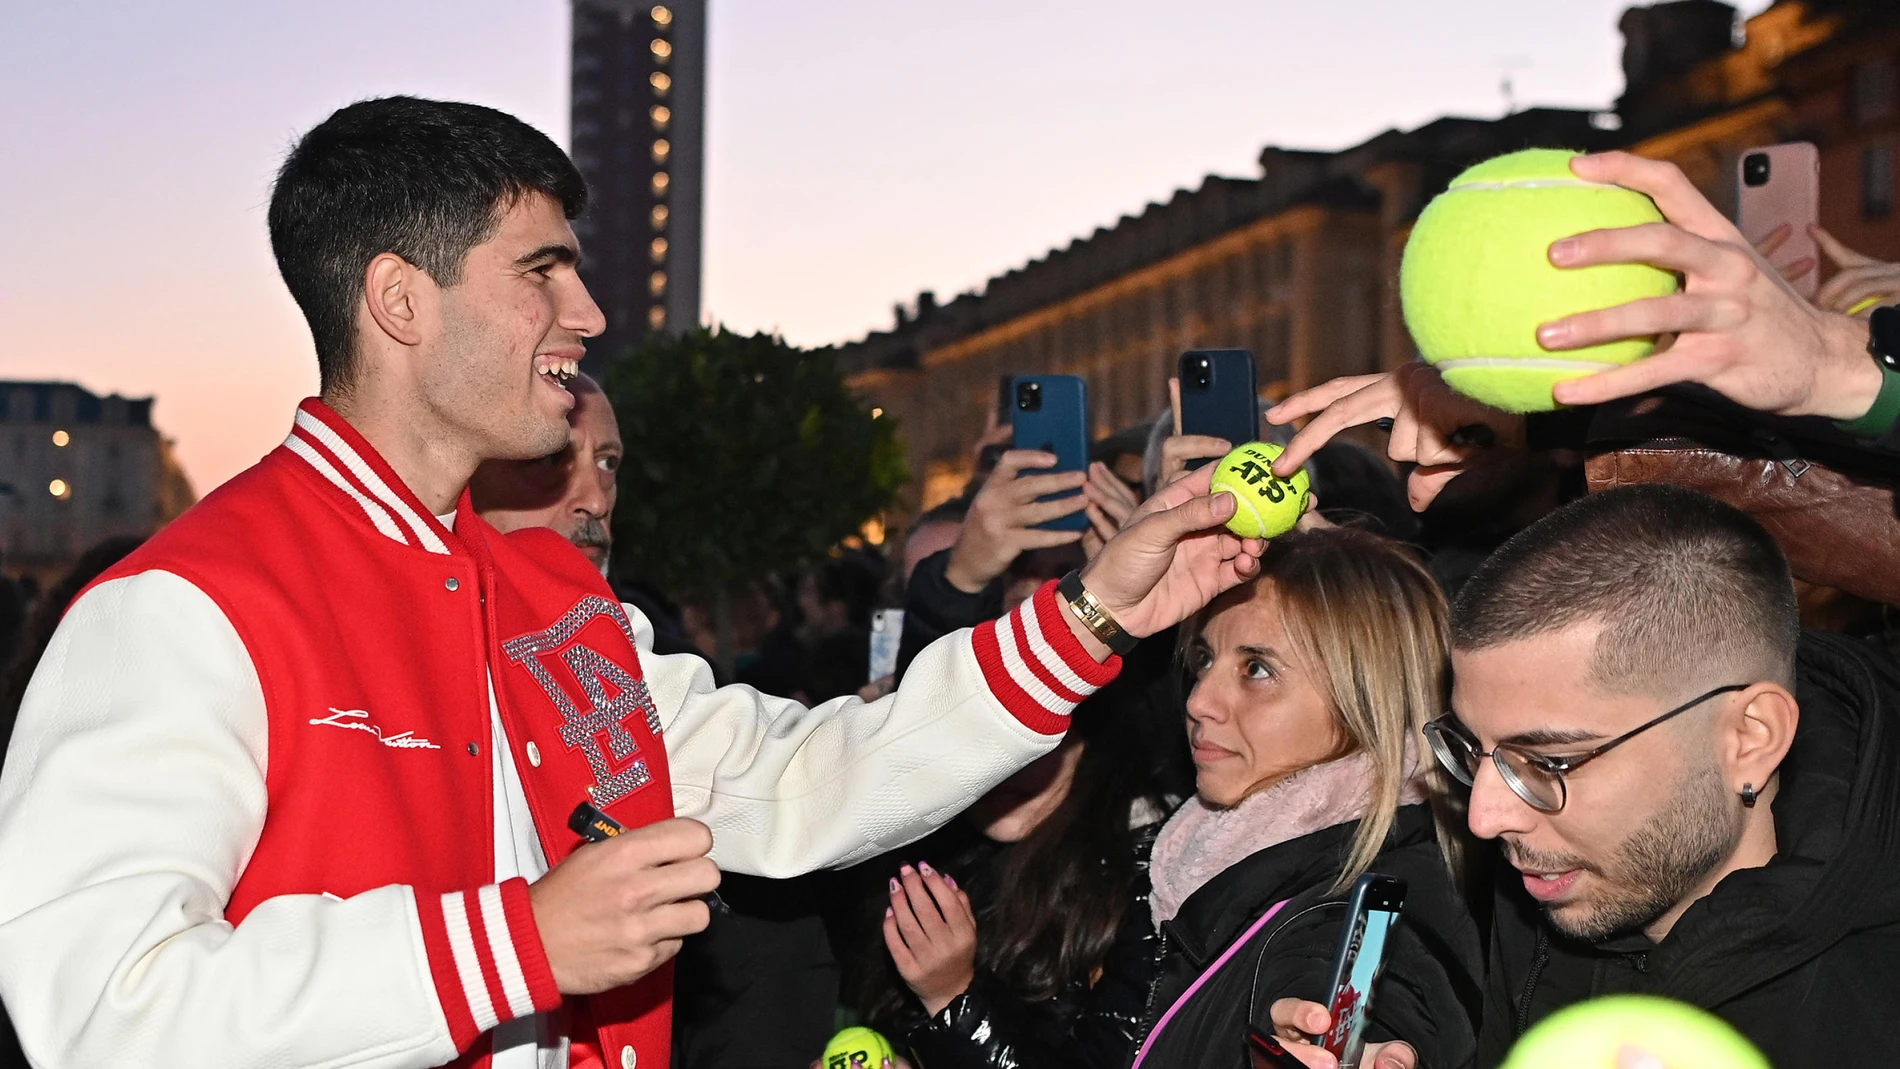 Turin (Italy), 10/11/2023.- Spanish player Carlos Alcaraz arrives to the presentation of the players for the ATP Finals tennis tournament at Piazzetta Reale in Turin, Italy, 10 November 2023. The 2023 ATP Finals take place in Turin from 12 to 19 November 2023. (Tenis, Italia) EFE/EPA/ALESSANDRO DI MARCO 